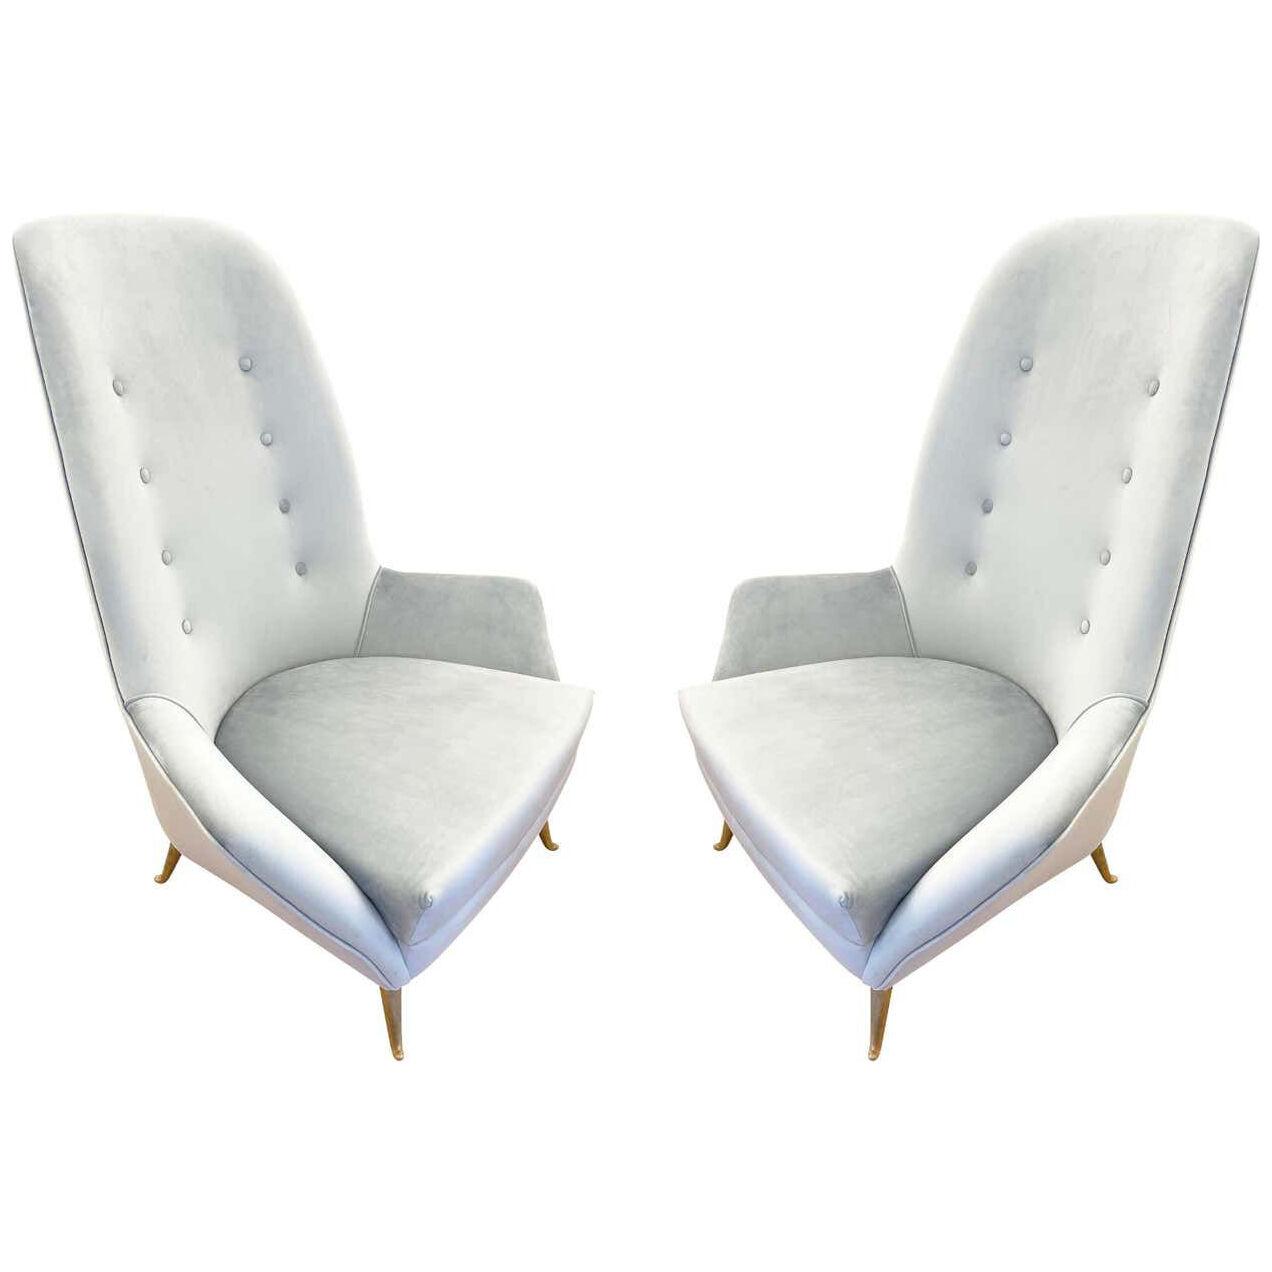 Pair of High Back Slipper Chairs, Italy, 1960's